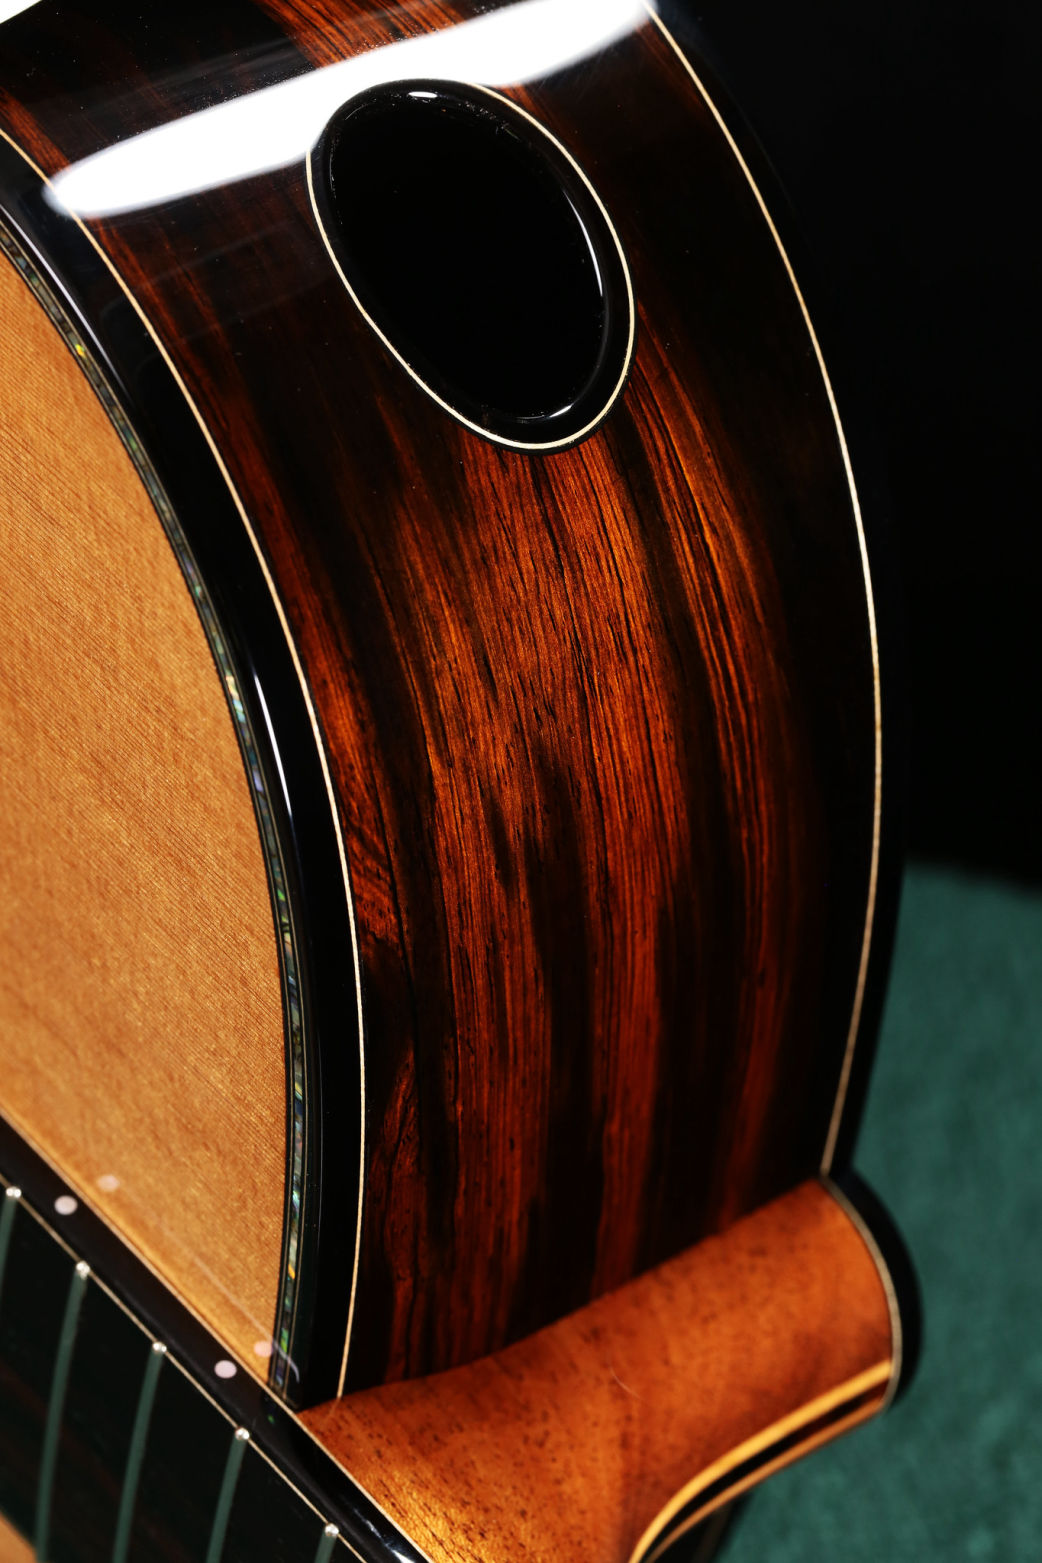 Oval Sound Port bound in Ebony with Maple Purfling Line